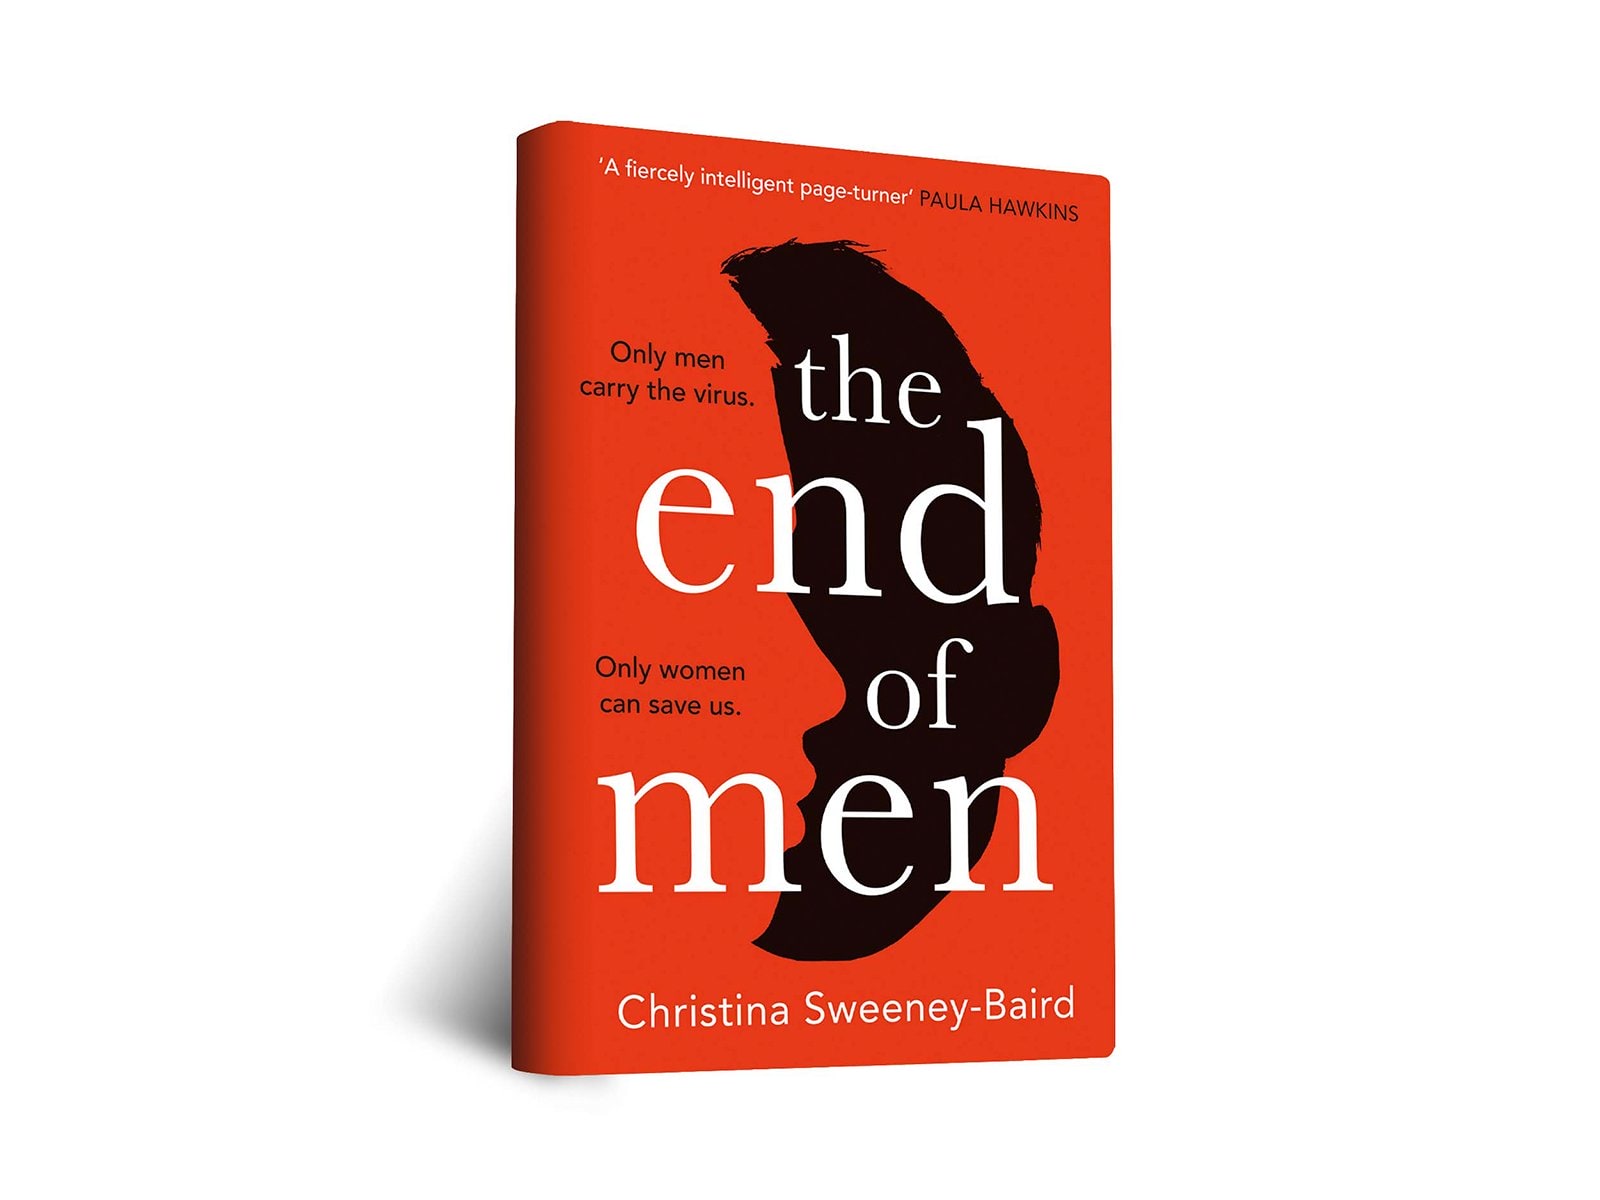 The End of Men by Christina Sweeney-Baird 